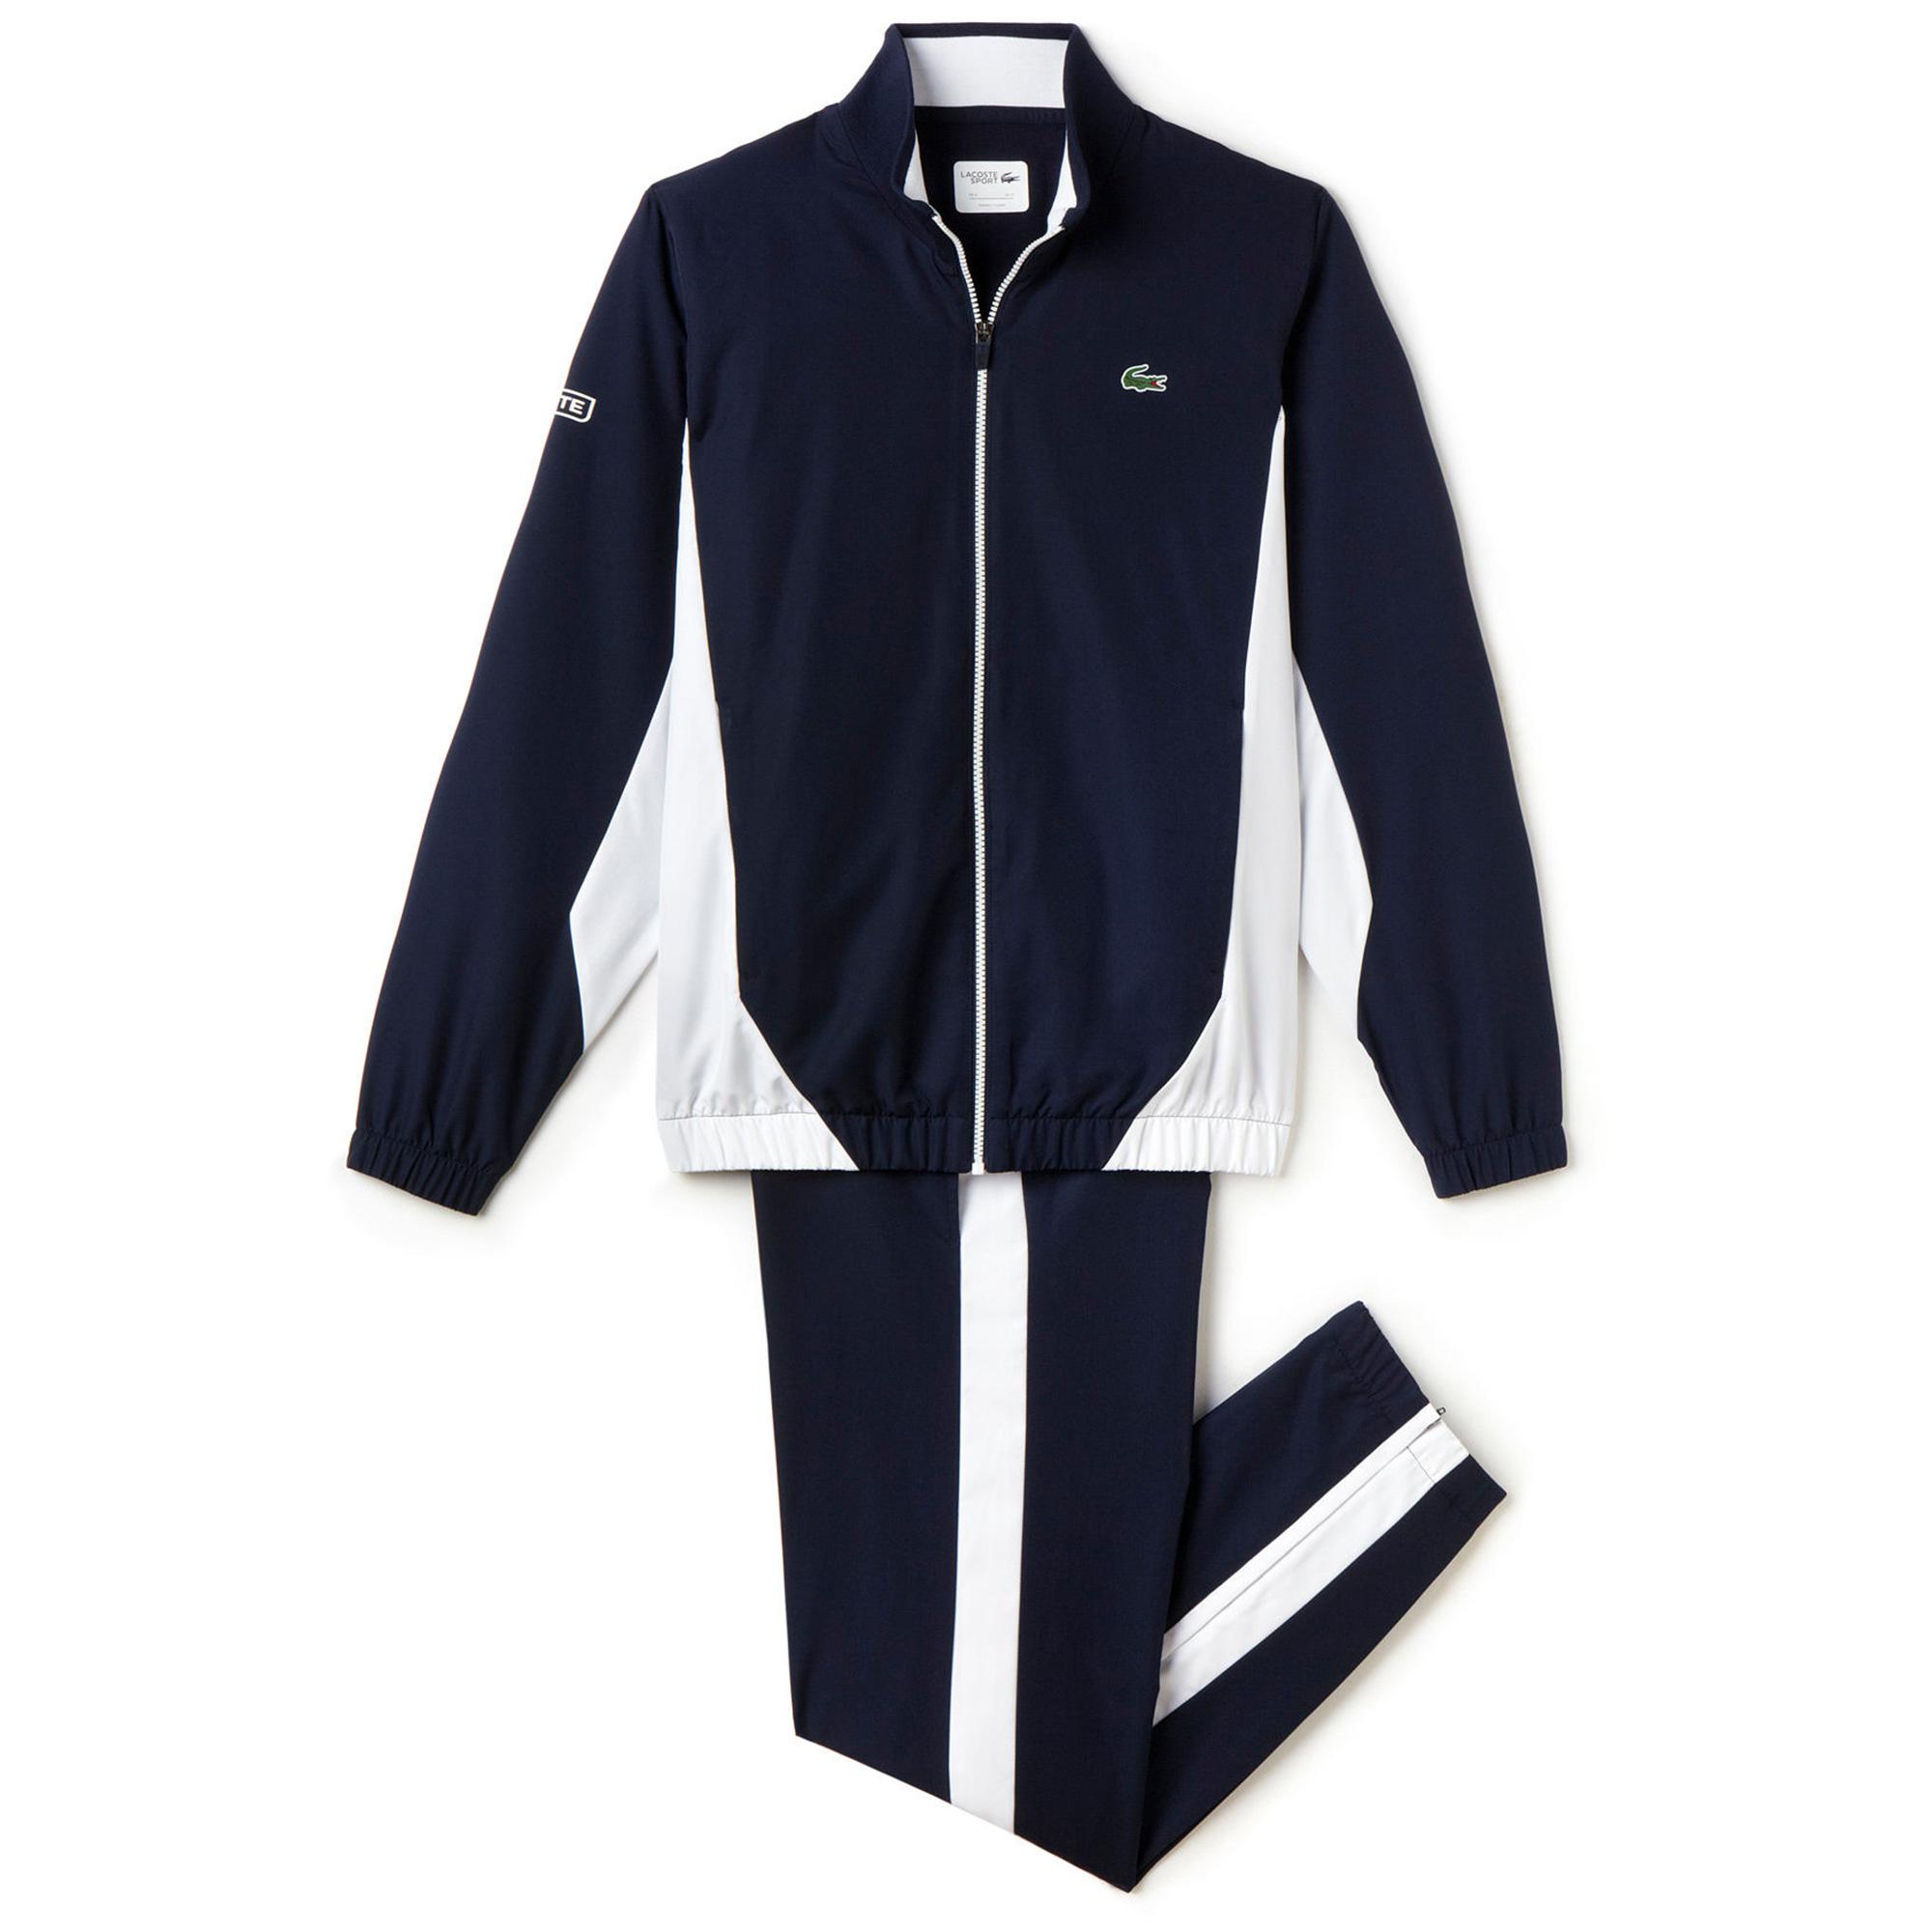 navy lacoste tracksuit - 52% OFF 